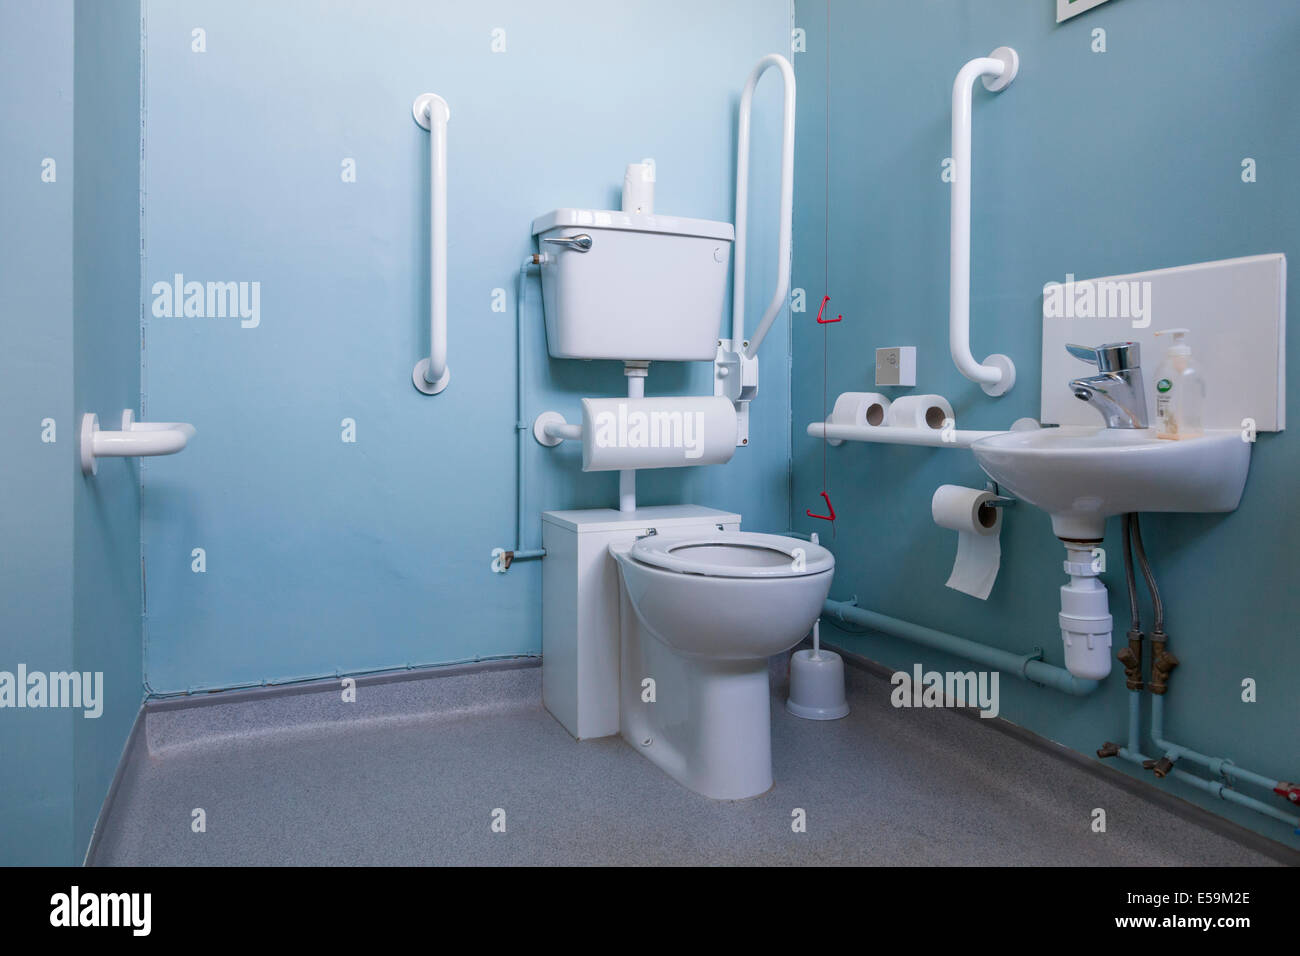 Accessible toilet and wash basin for the disabled, England, UK Stock Photo